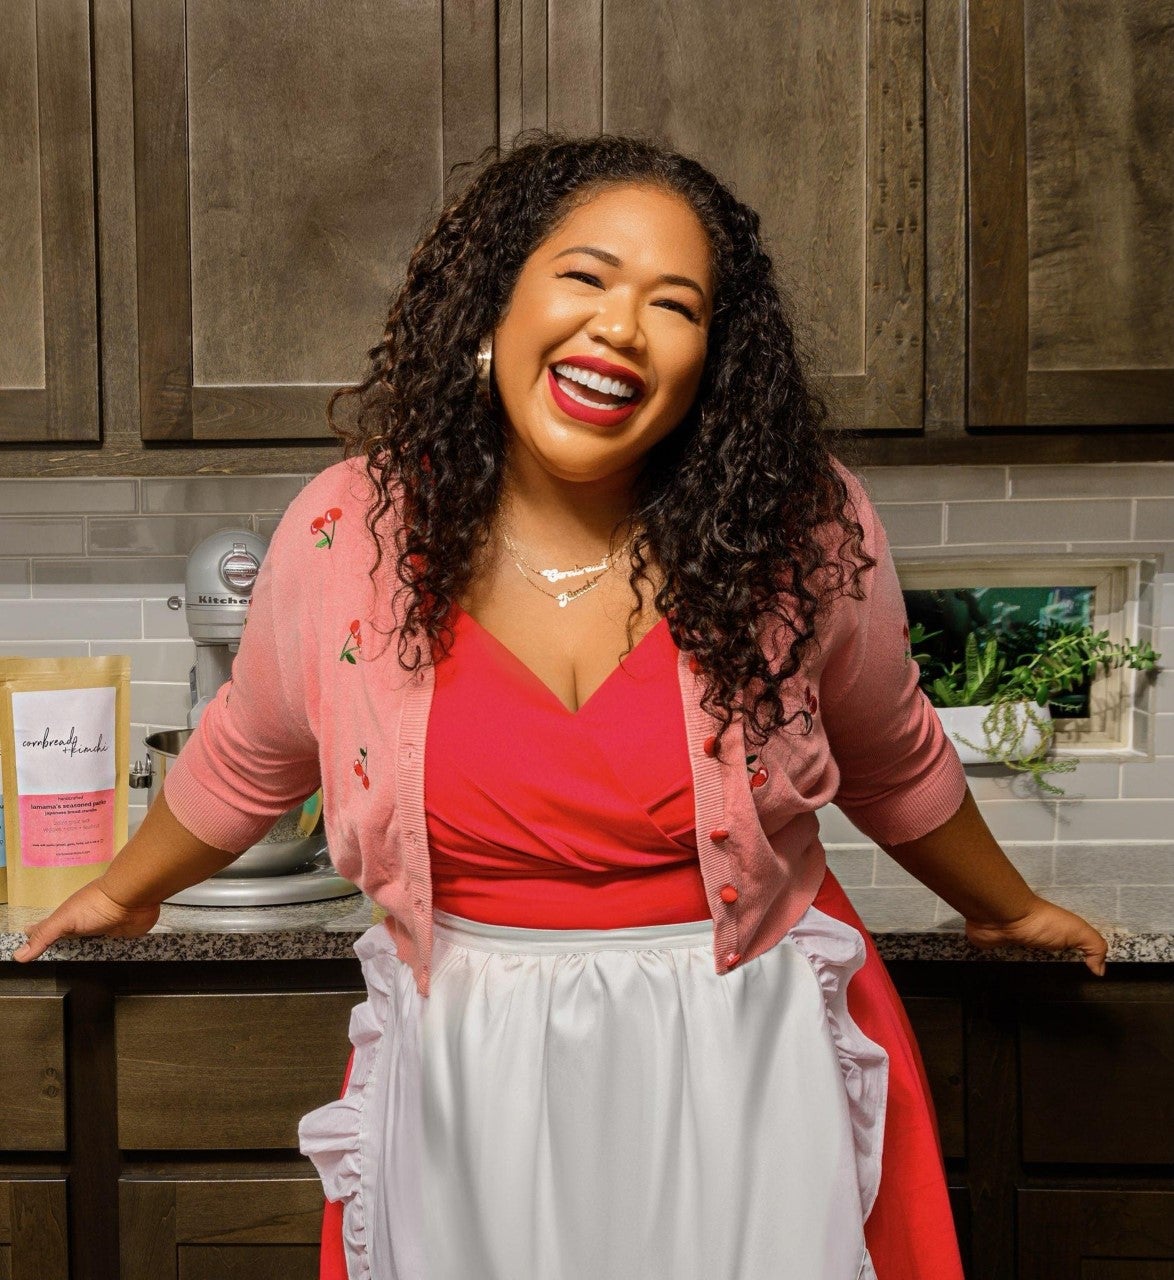 Chef LaMara Davidson On Fusing Her African American And Korean Heritage To Create "Seoulfood"